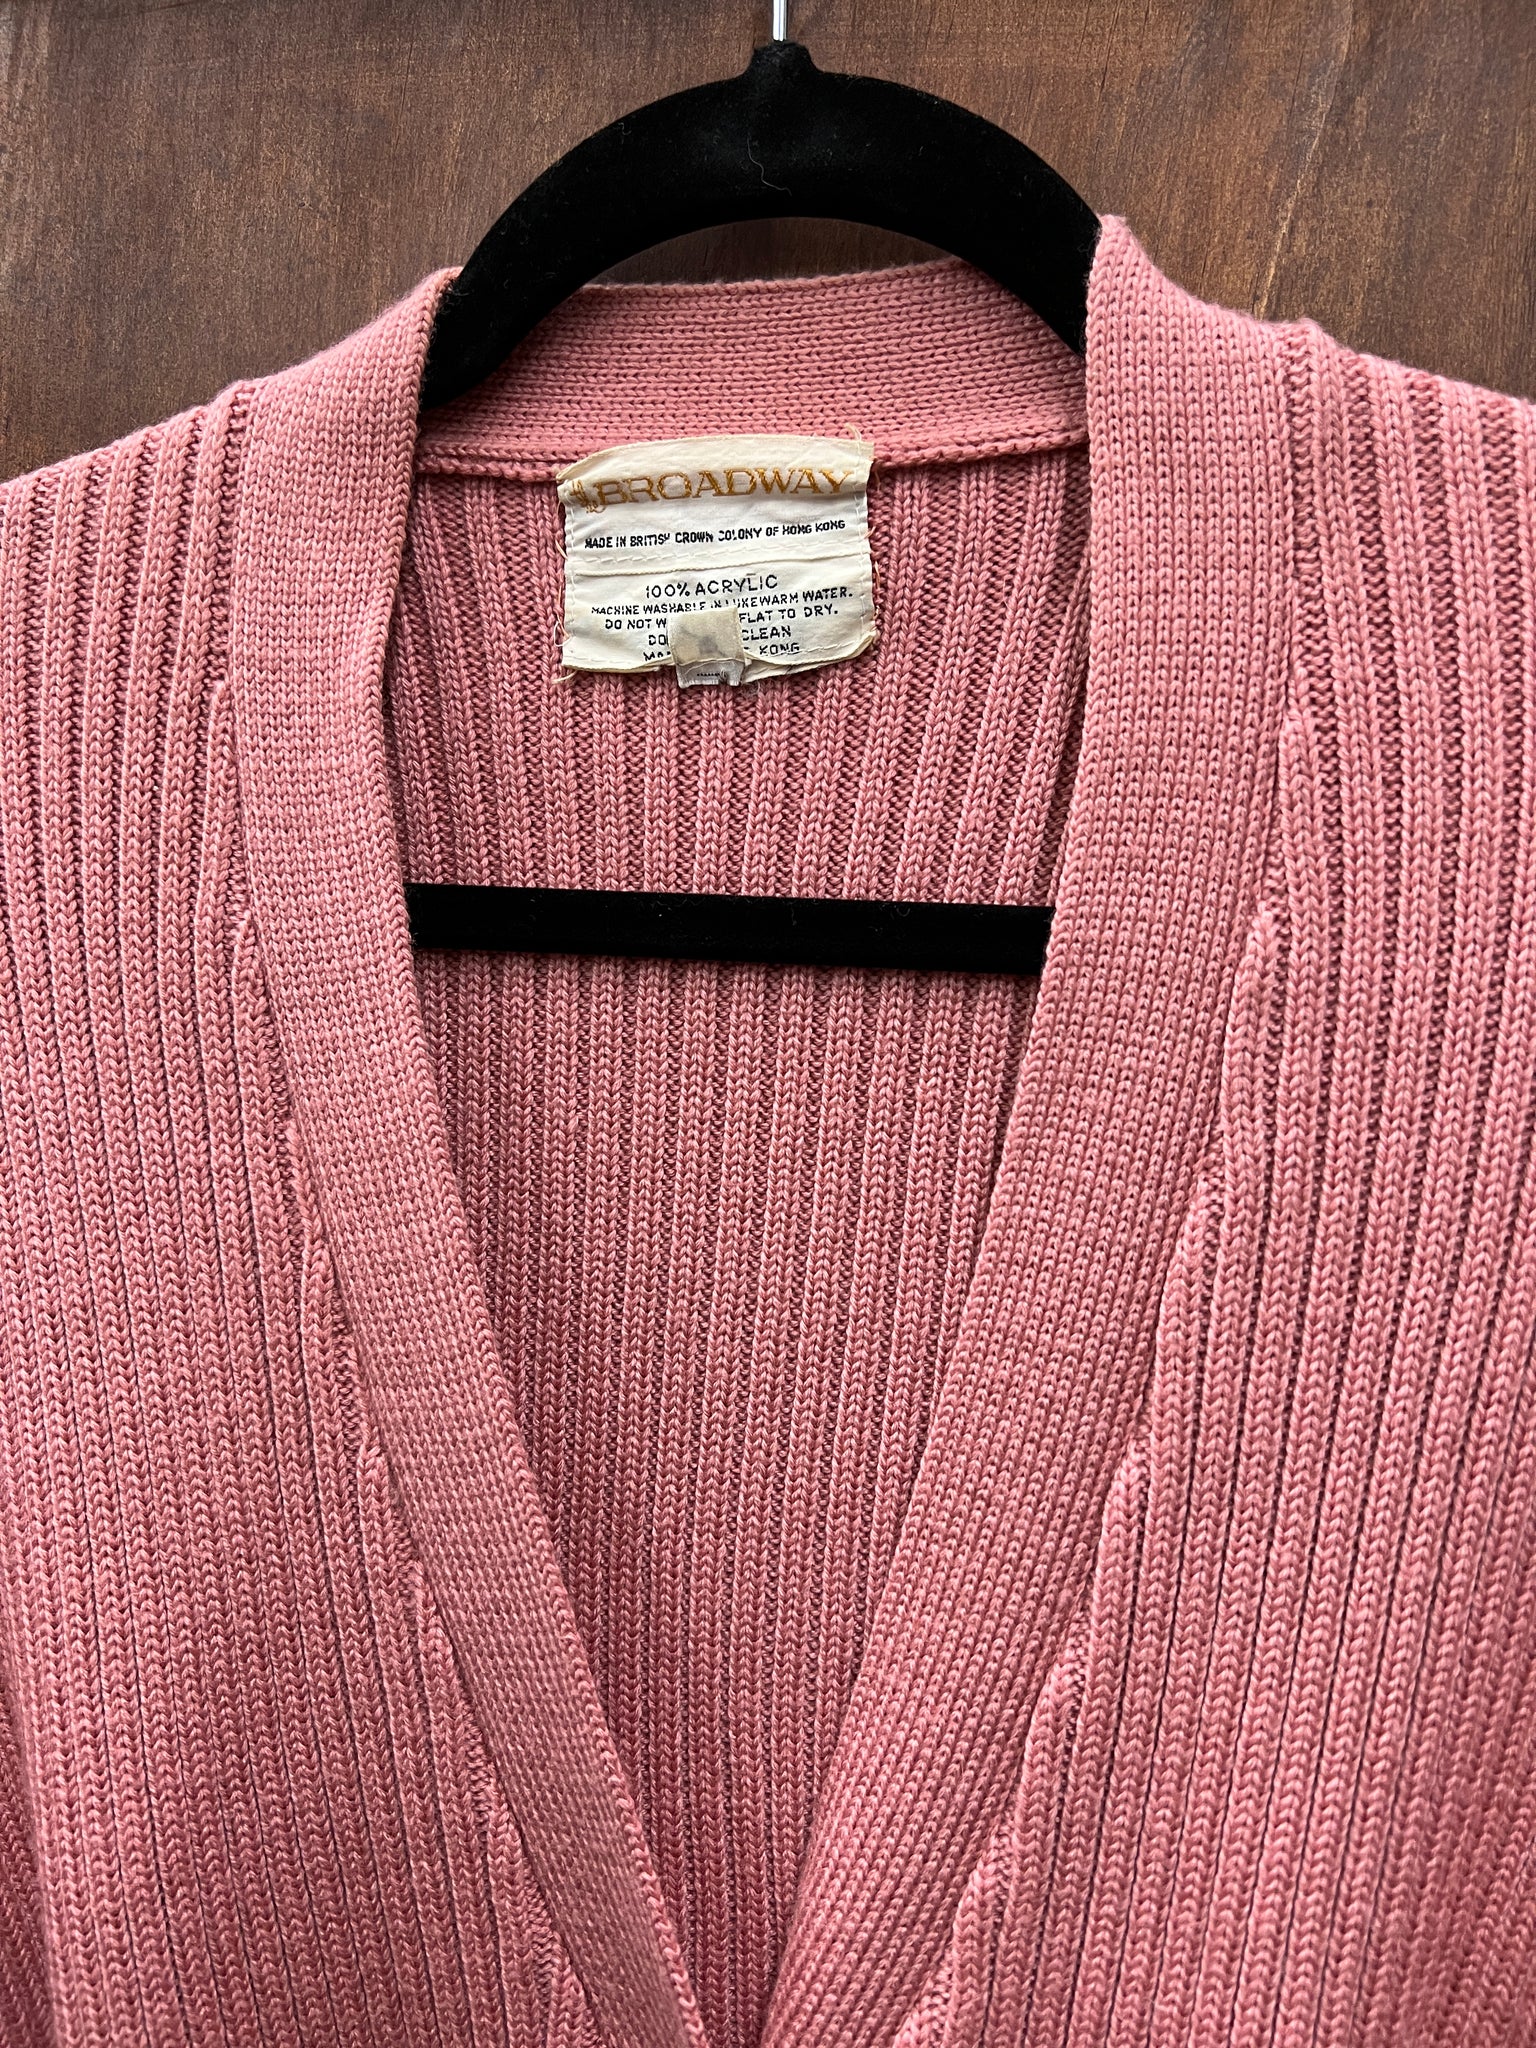 1970s-SWEATER- Broadway light pink belted cardigan